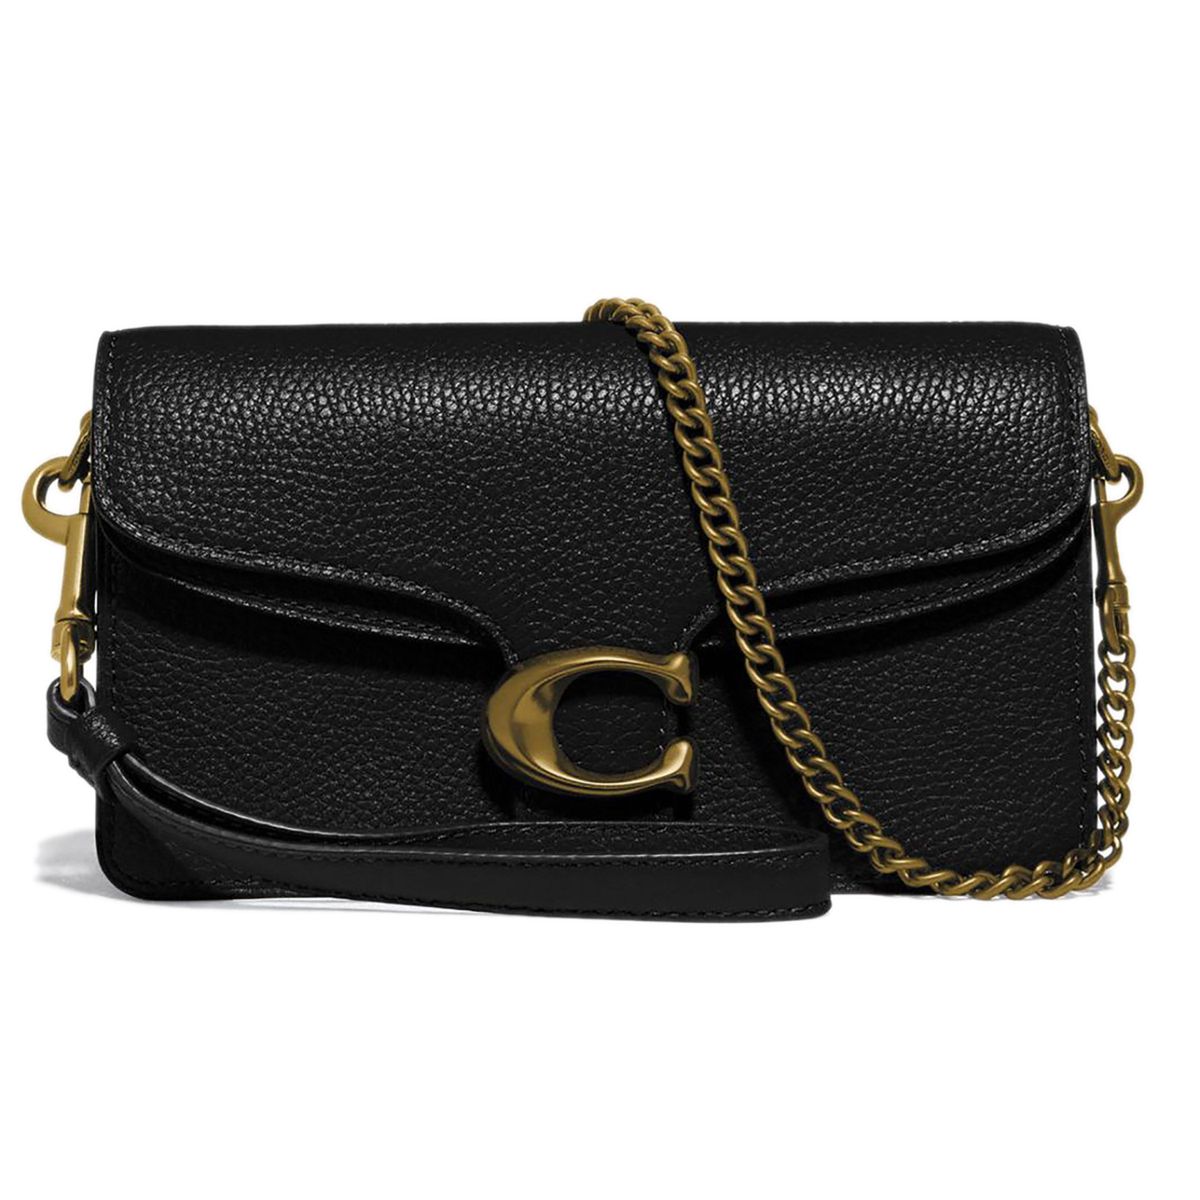 Coach Early Black Friday Sale: Best Deals on Handbags | InStyle